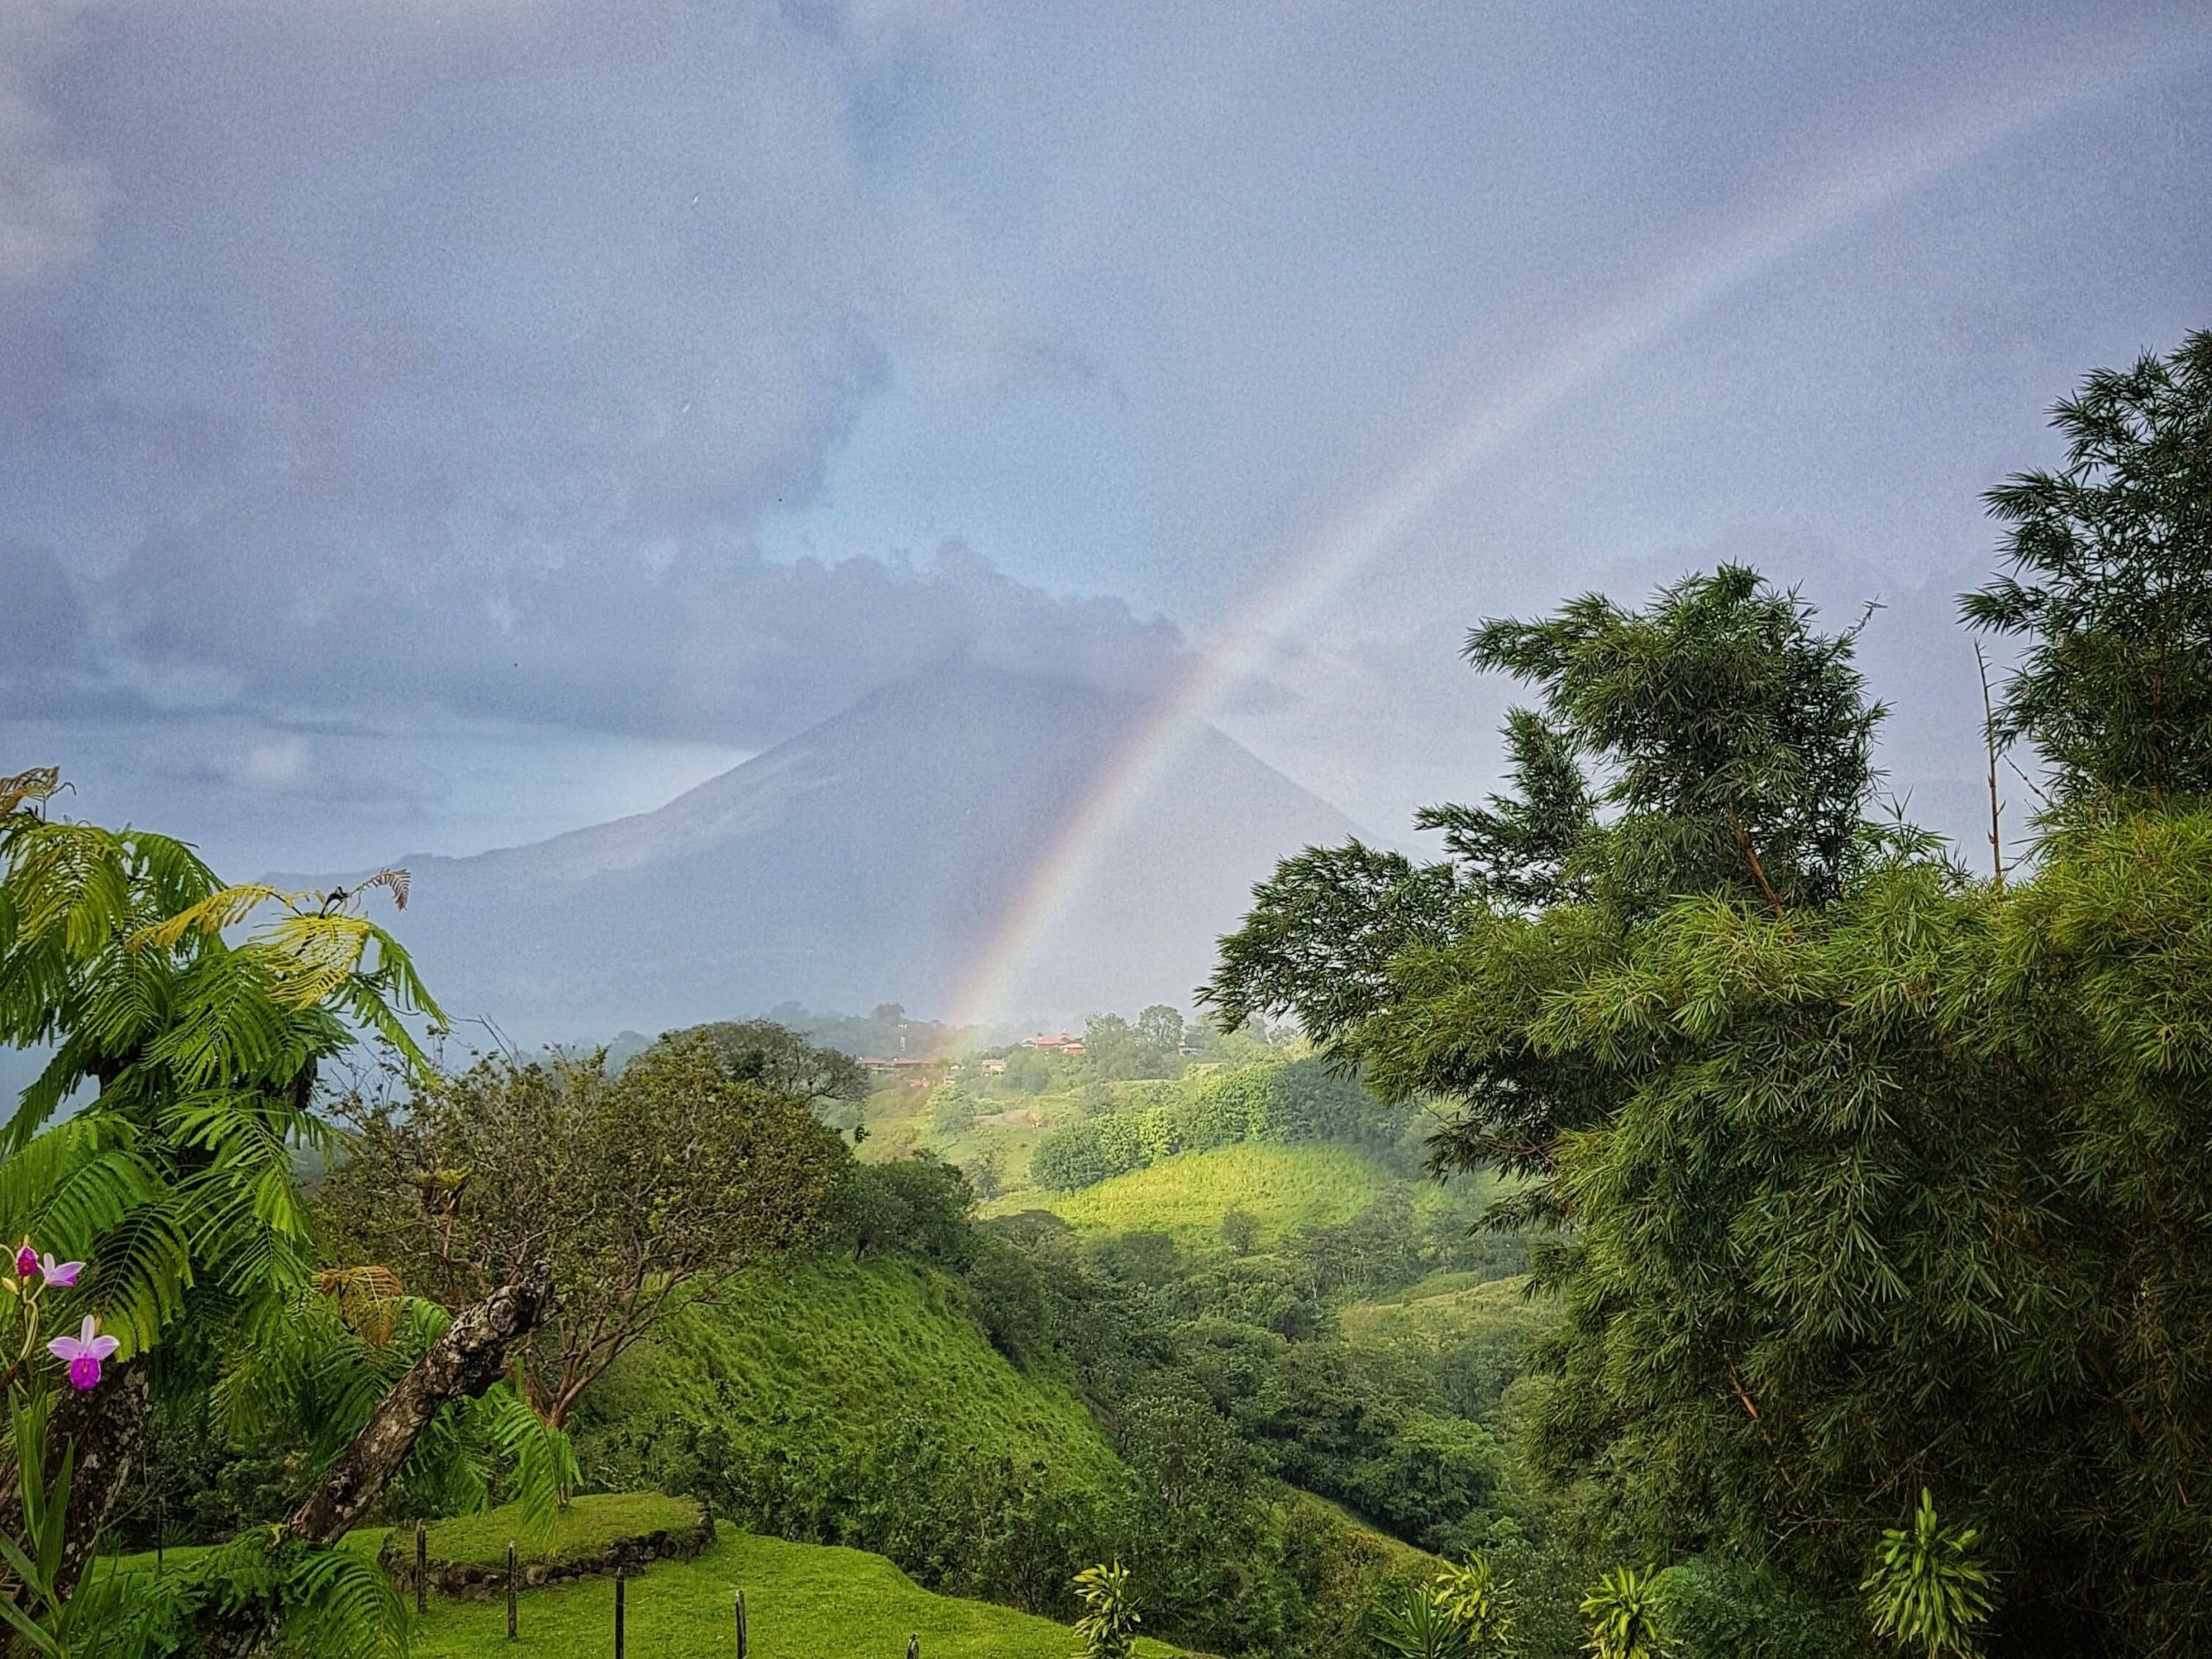 A beautiful rainbow scene from the retreat at Essence Arenal in Costa Rica overlooking the lush green jungle canopy.